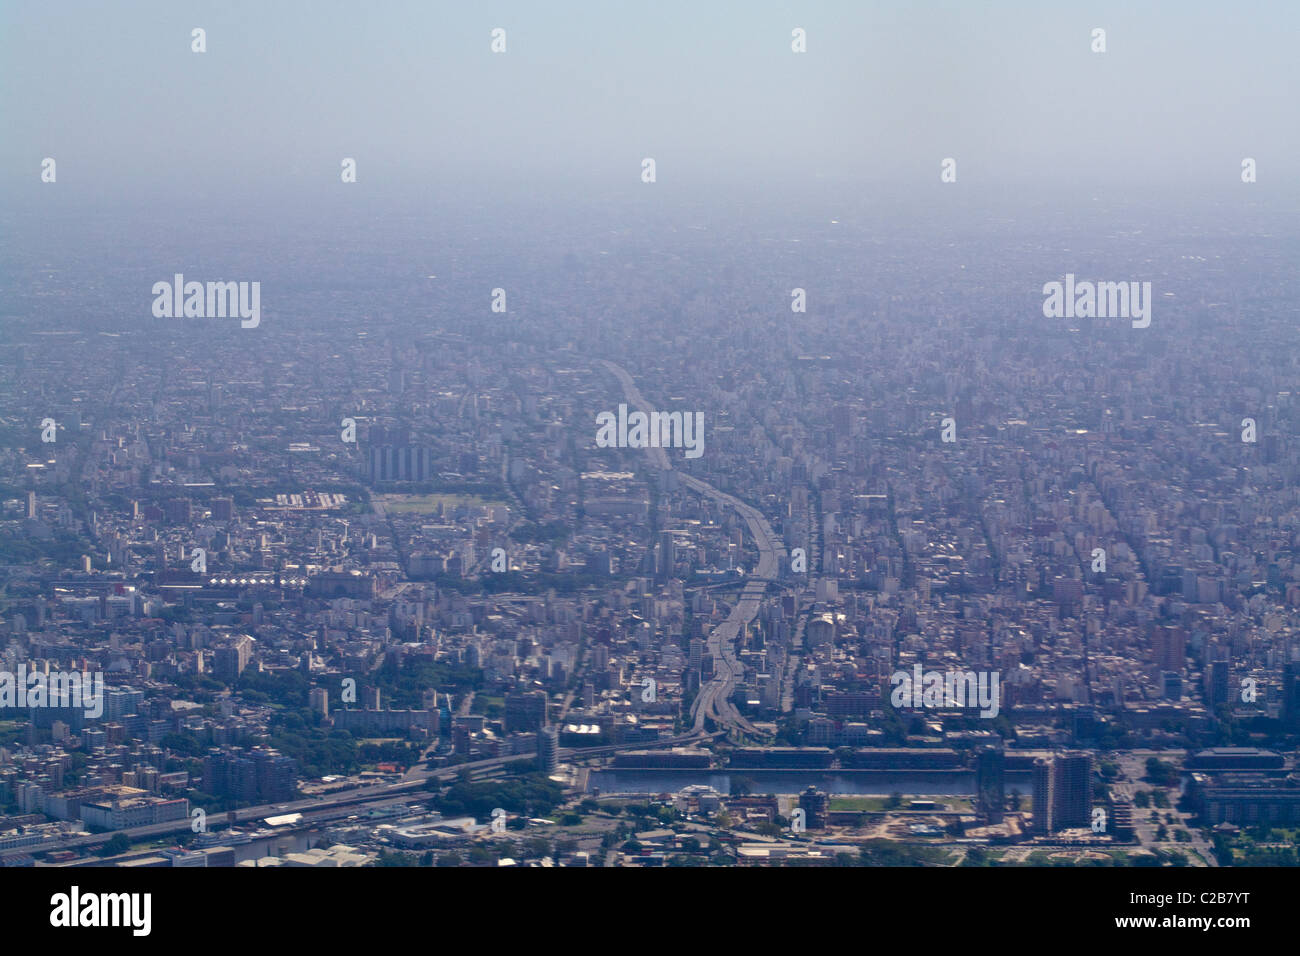 Pollutions and smog shroud the sprawling city skyline of Buenos Aires. Stock Photo